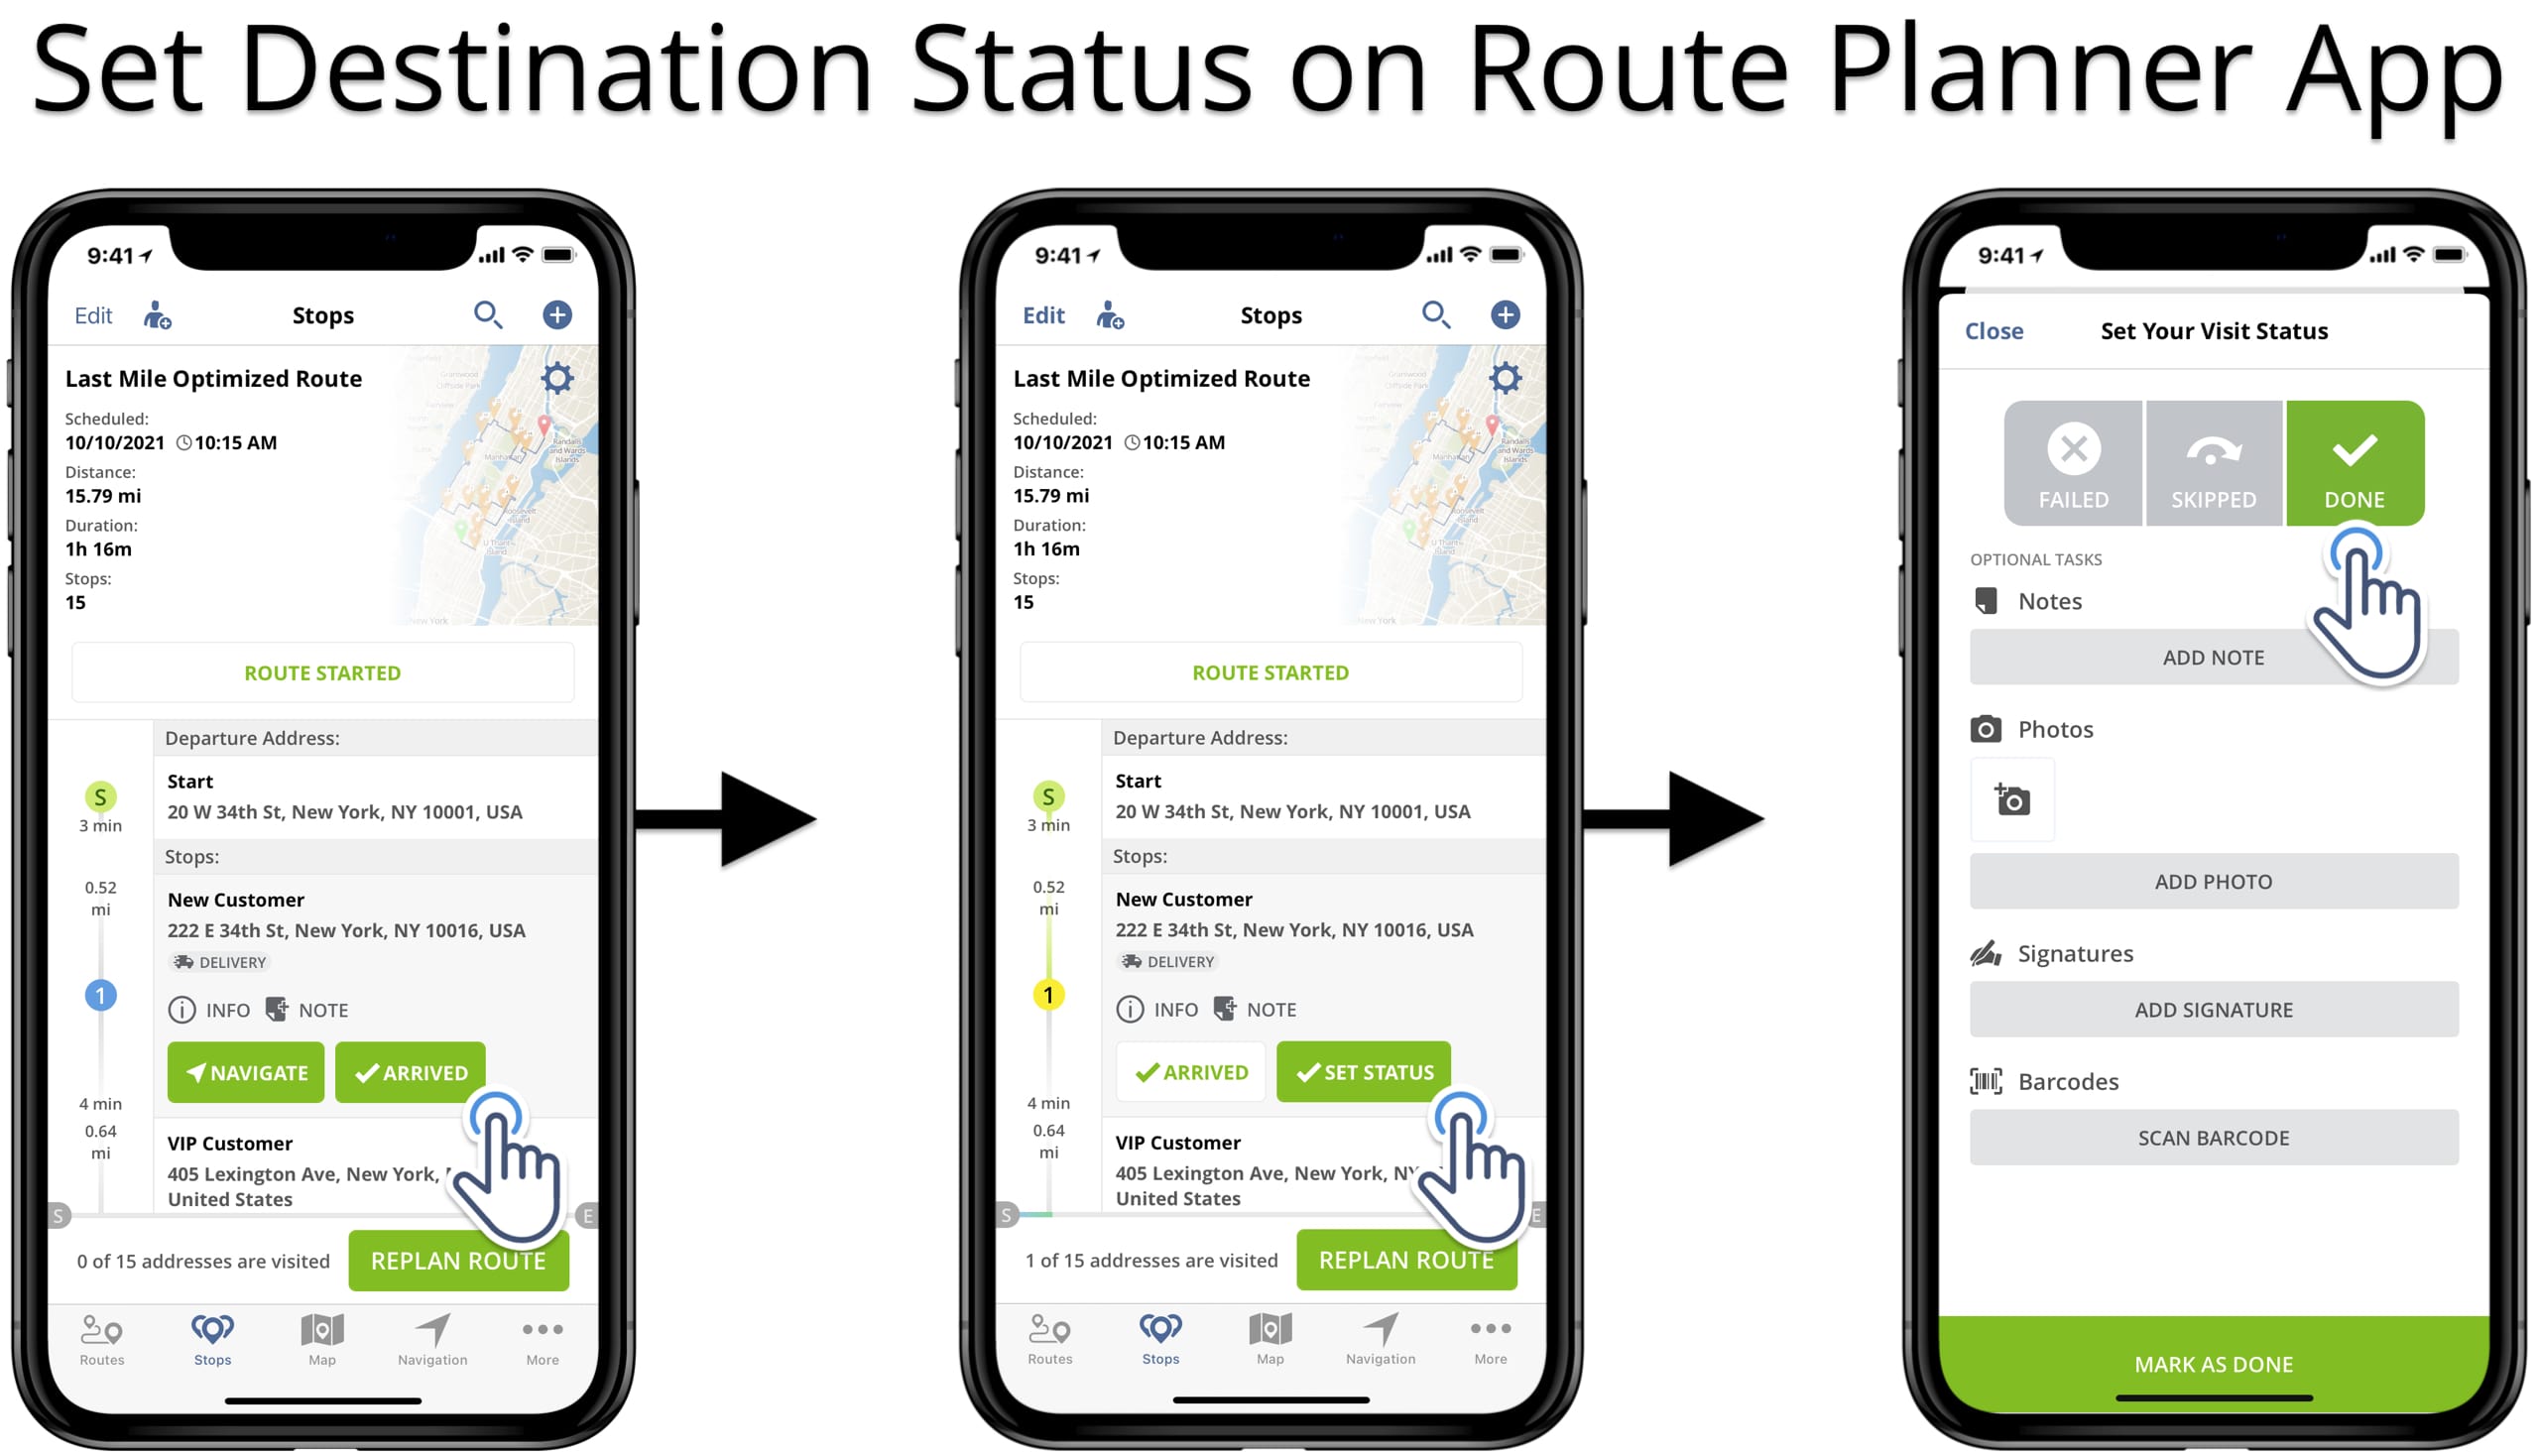 Set route destination status to stops on planned routes using the iPhone Route Planner app.